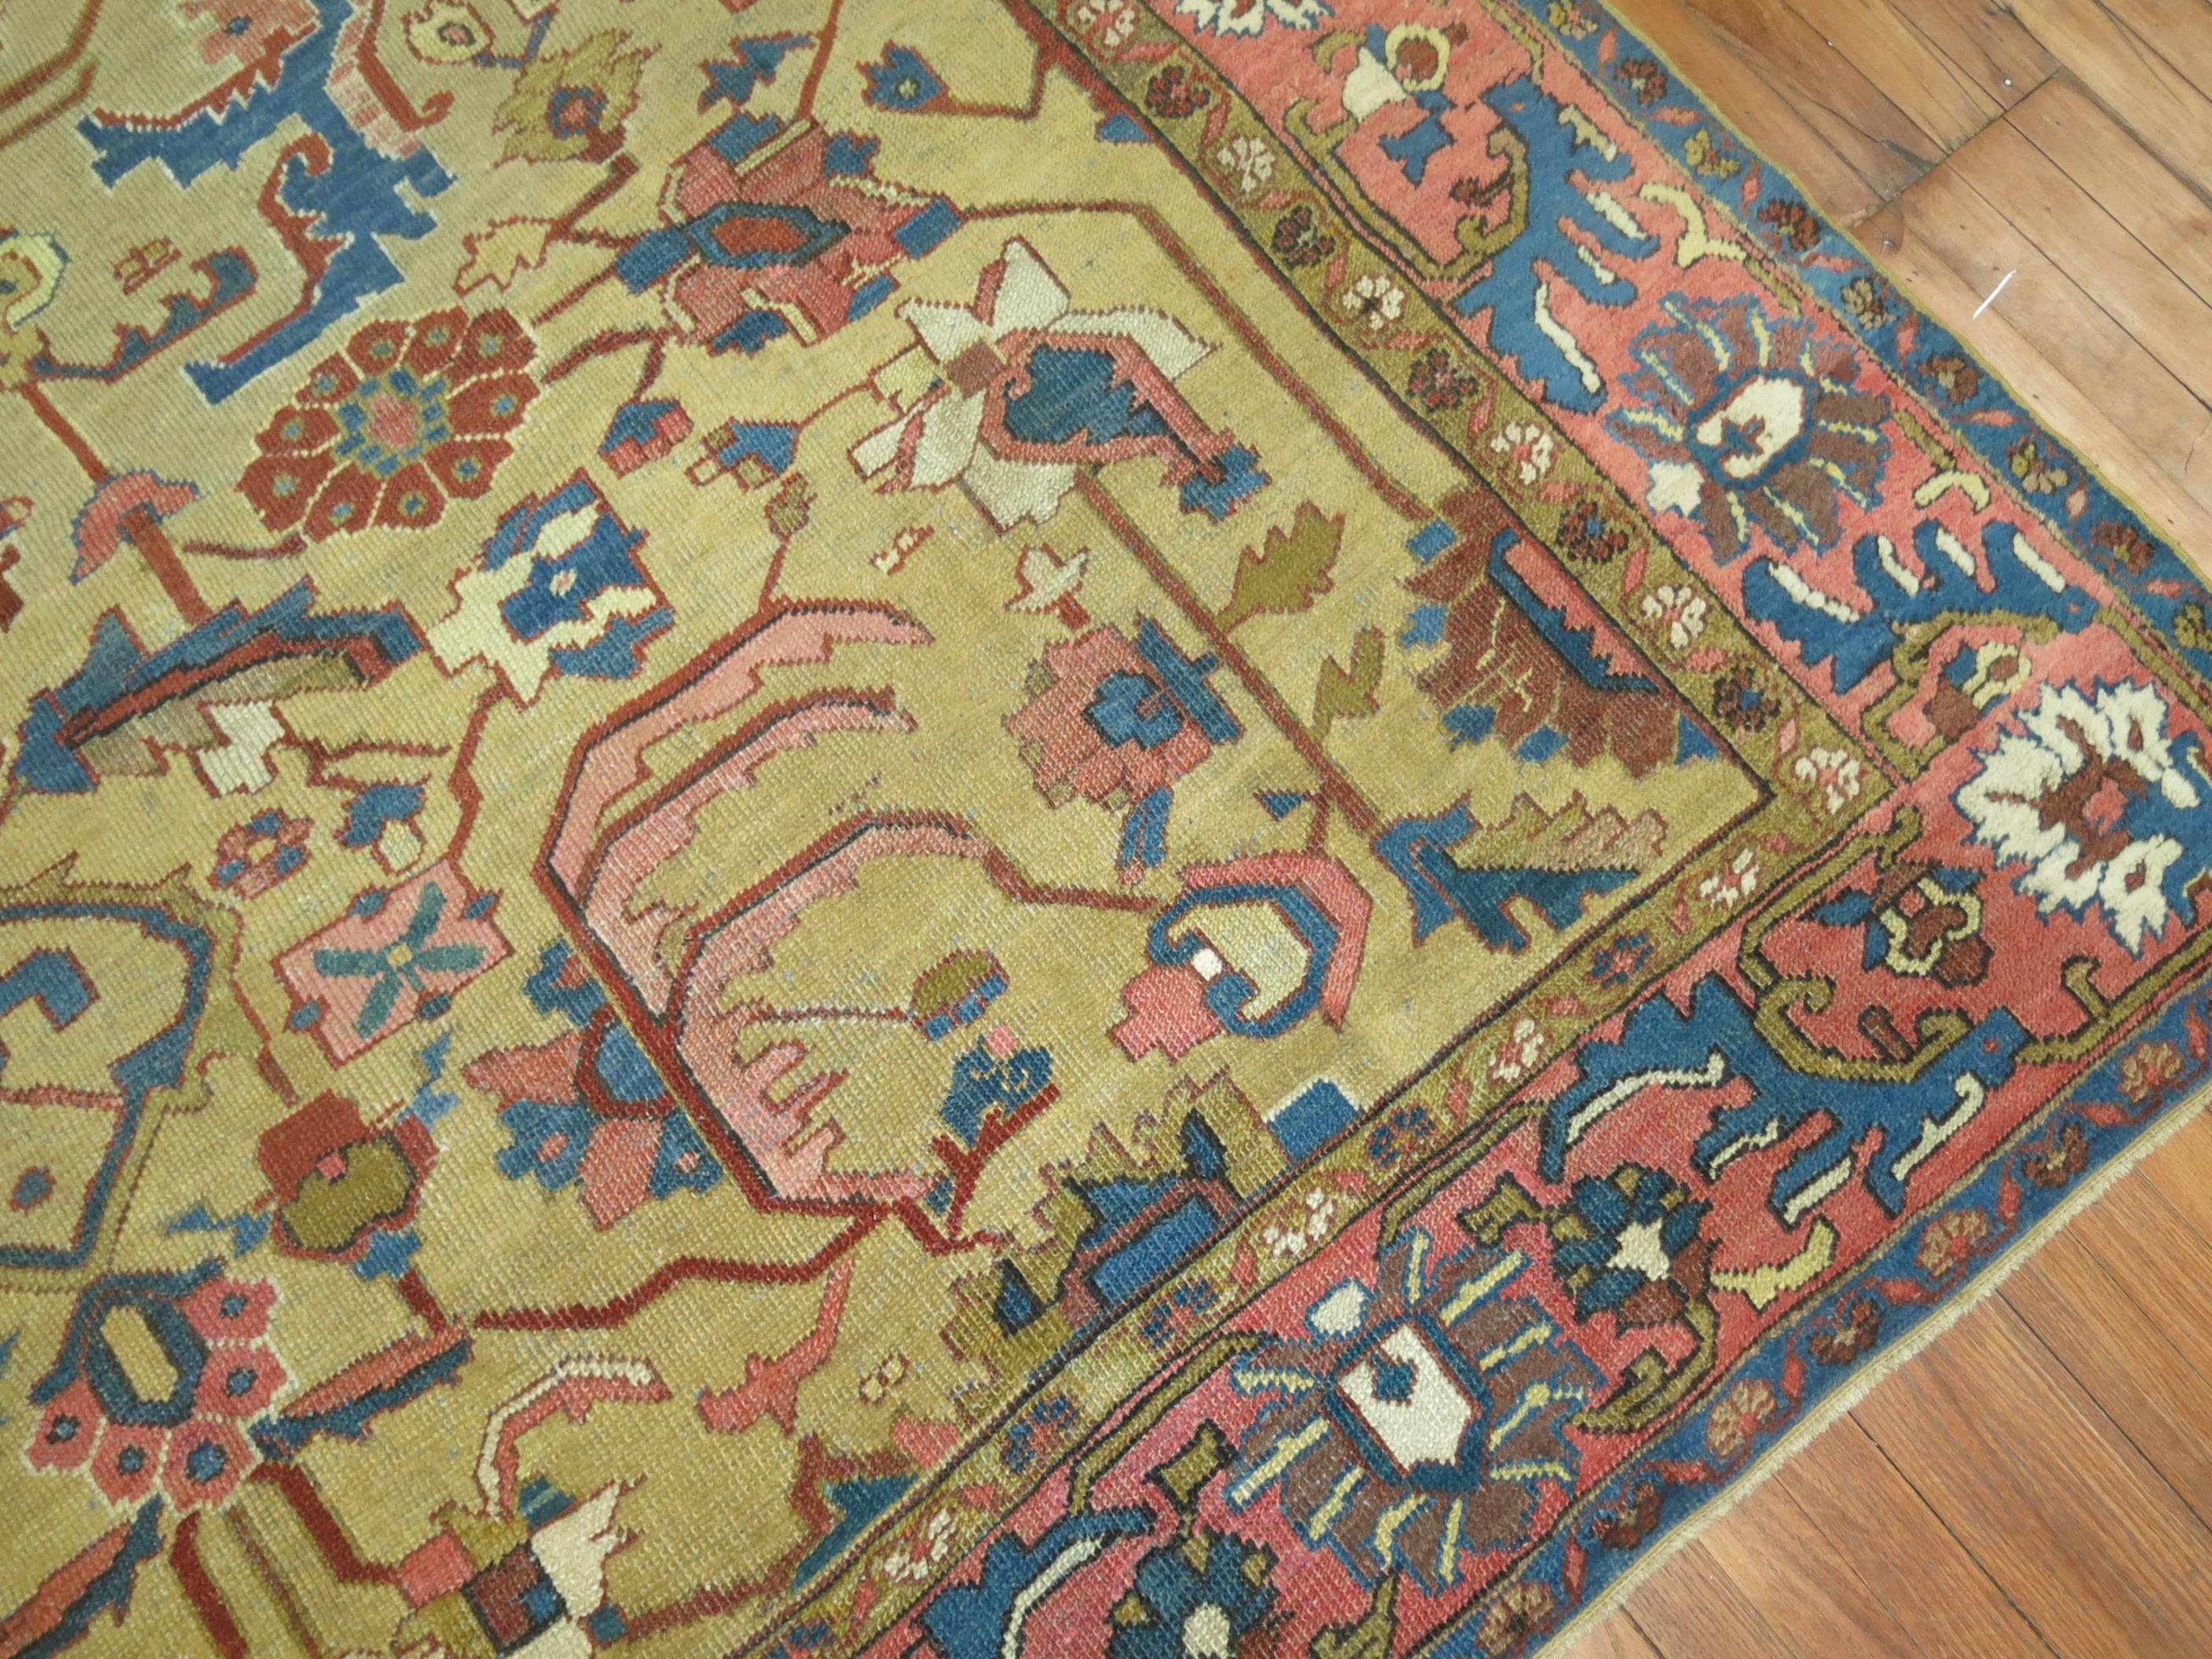 Early 20th century Persian Heriz carpet featuring an unusual mustard color ground. Predominant accents in blue and terracotta.

8'9'' x 12'1''